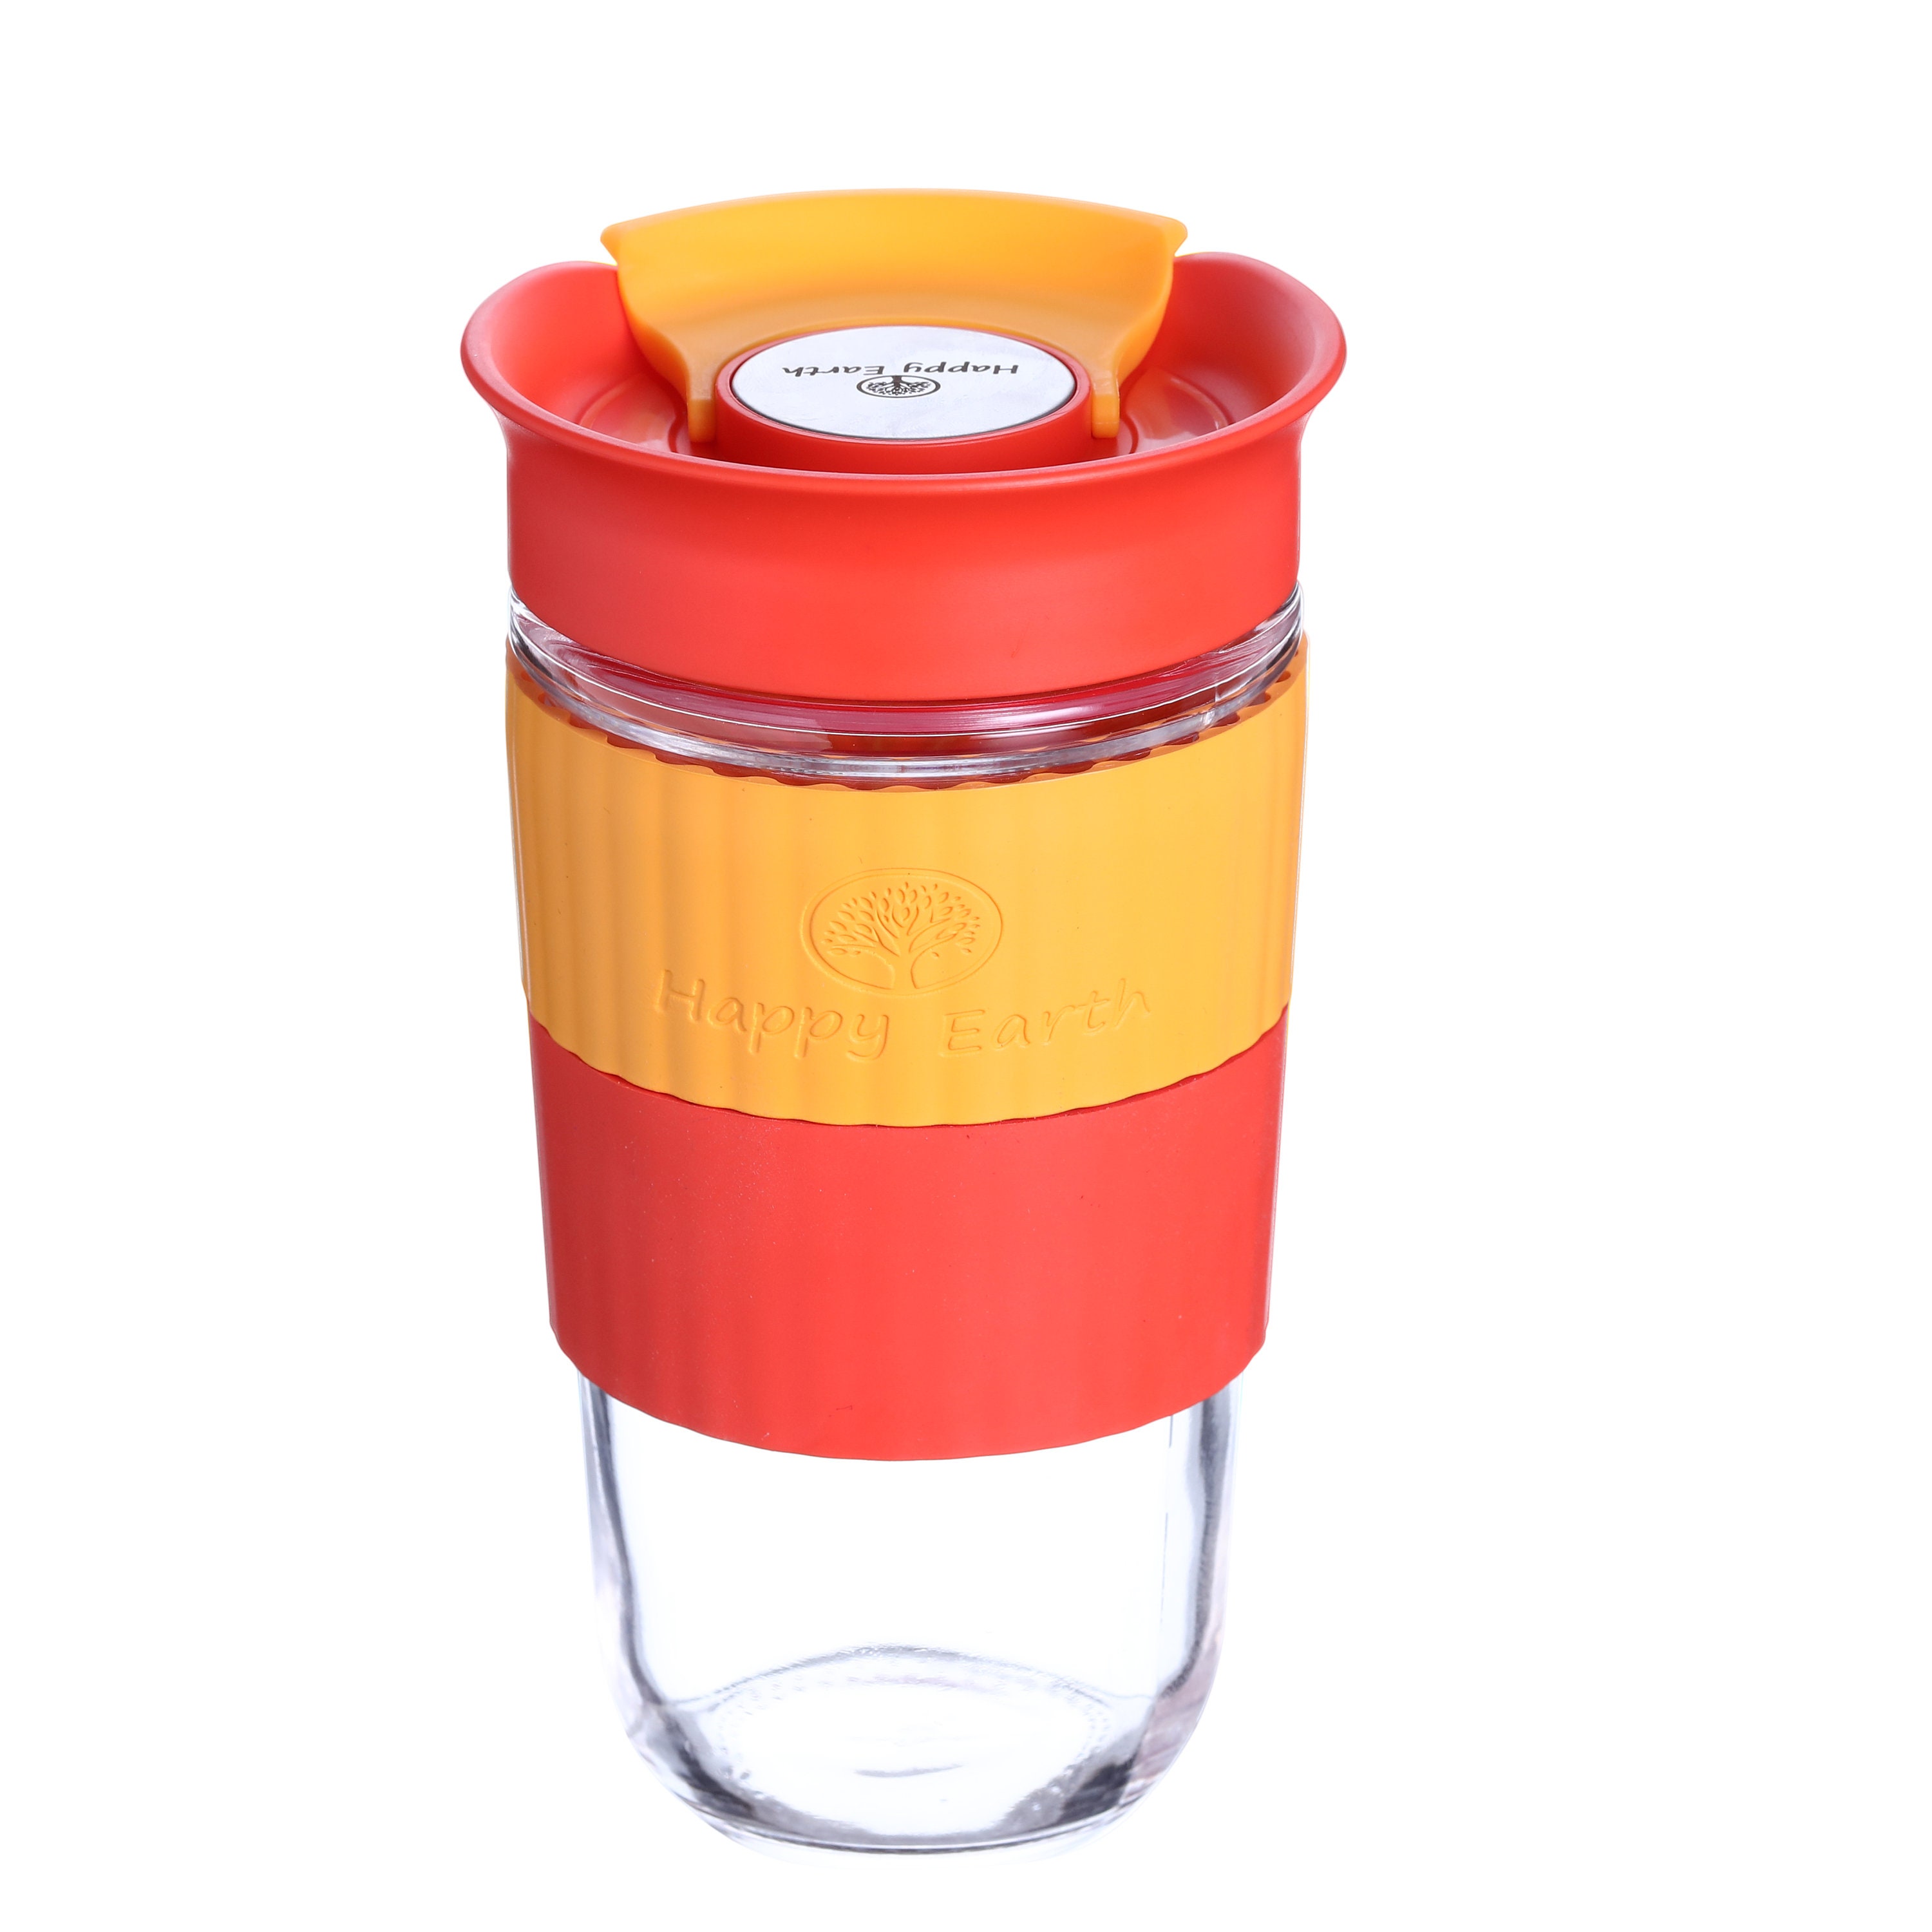 Solecup Reusable Glass Travel Cup Spill Proof Insulated Coffee Mug